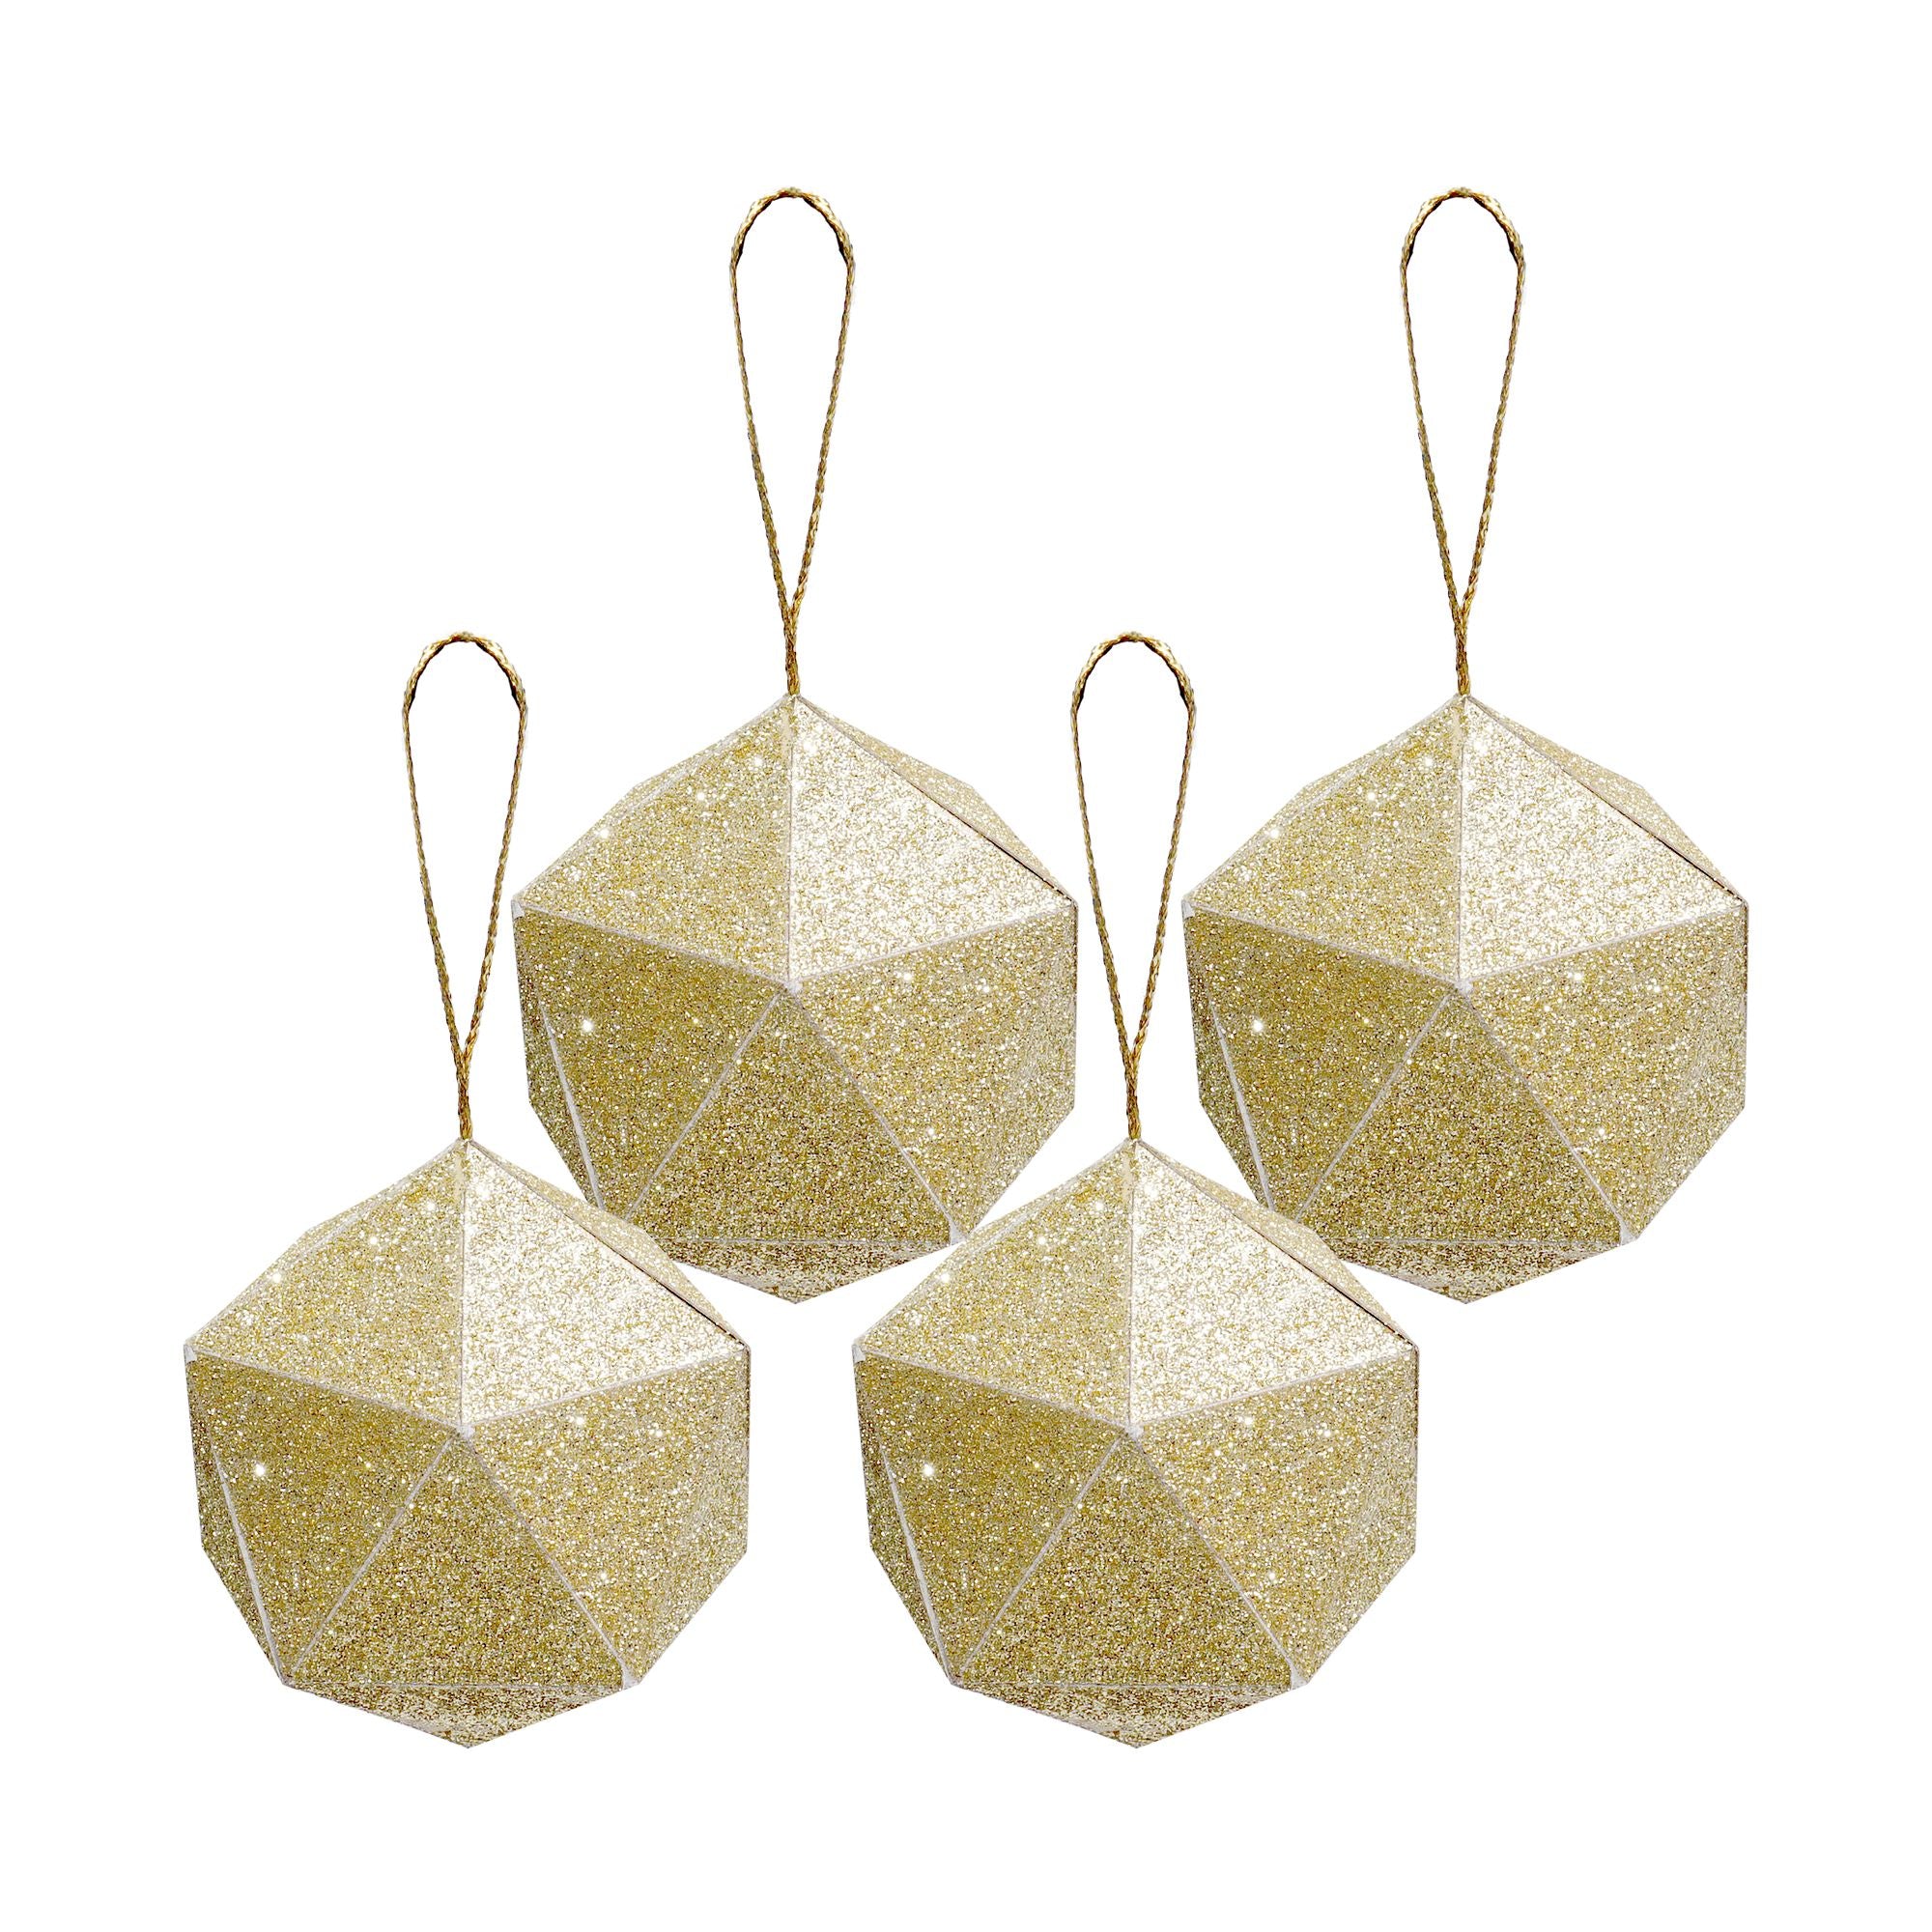 Handmade Christmas Trapezoid Hanging Glitter Ornaments, 65mm, Gold, 4pc